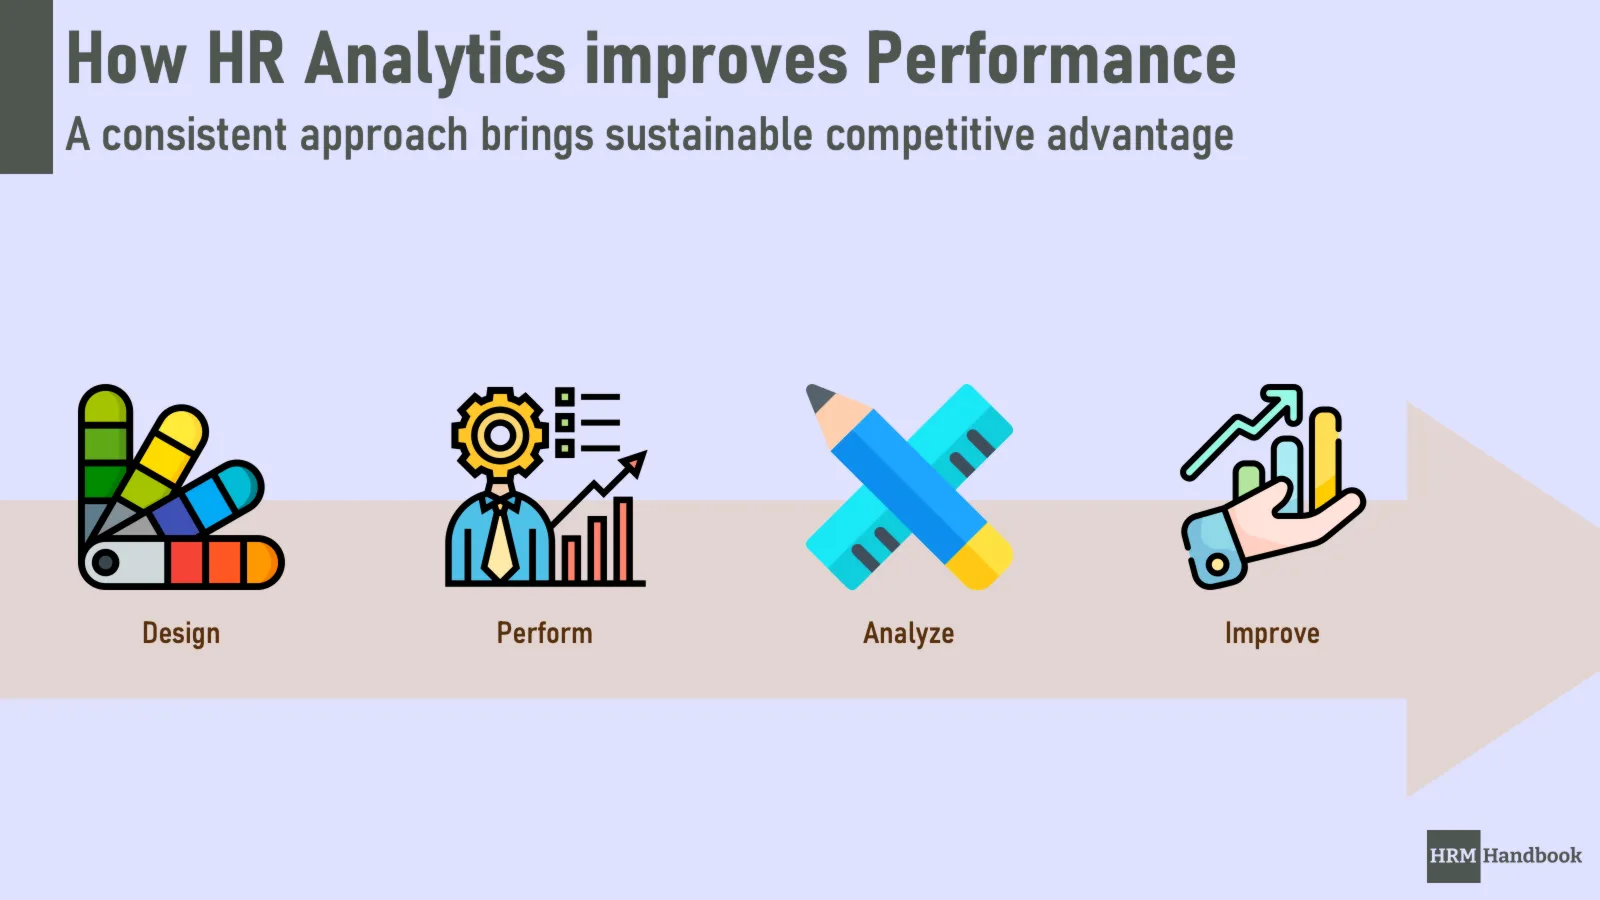 How HR Analytics Improves Overall Performance of Human Resources through KPIs and regular Measurement